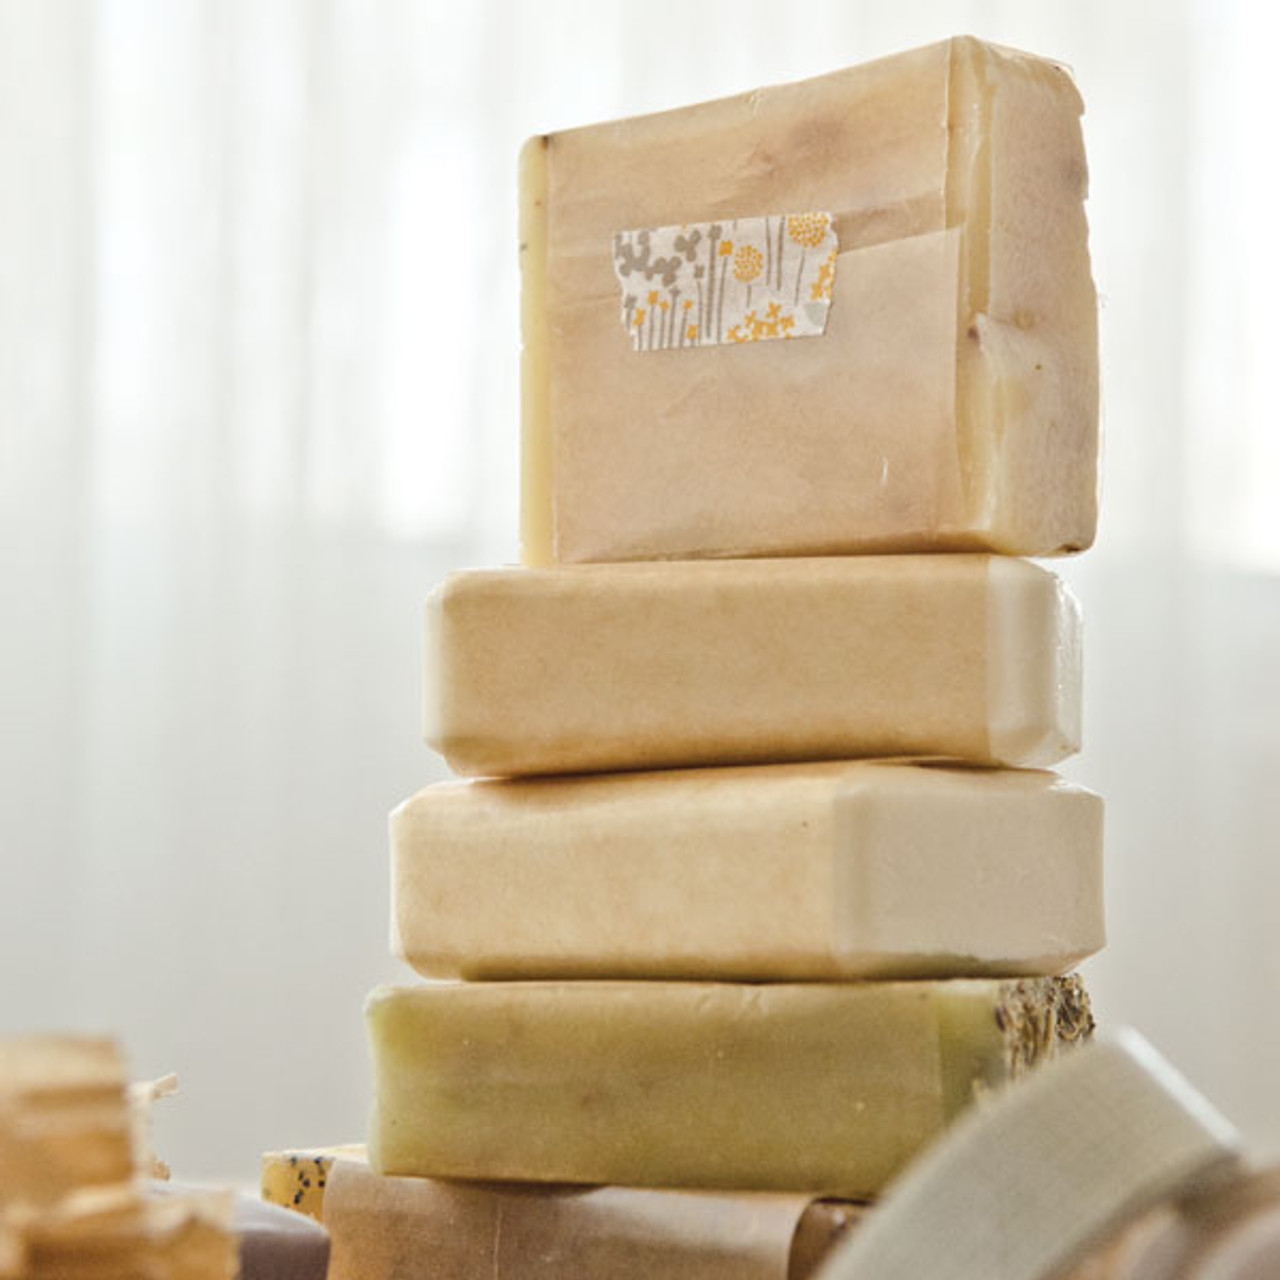 Super Simple Soap Packaging - Stampington & Company